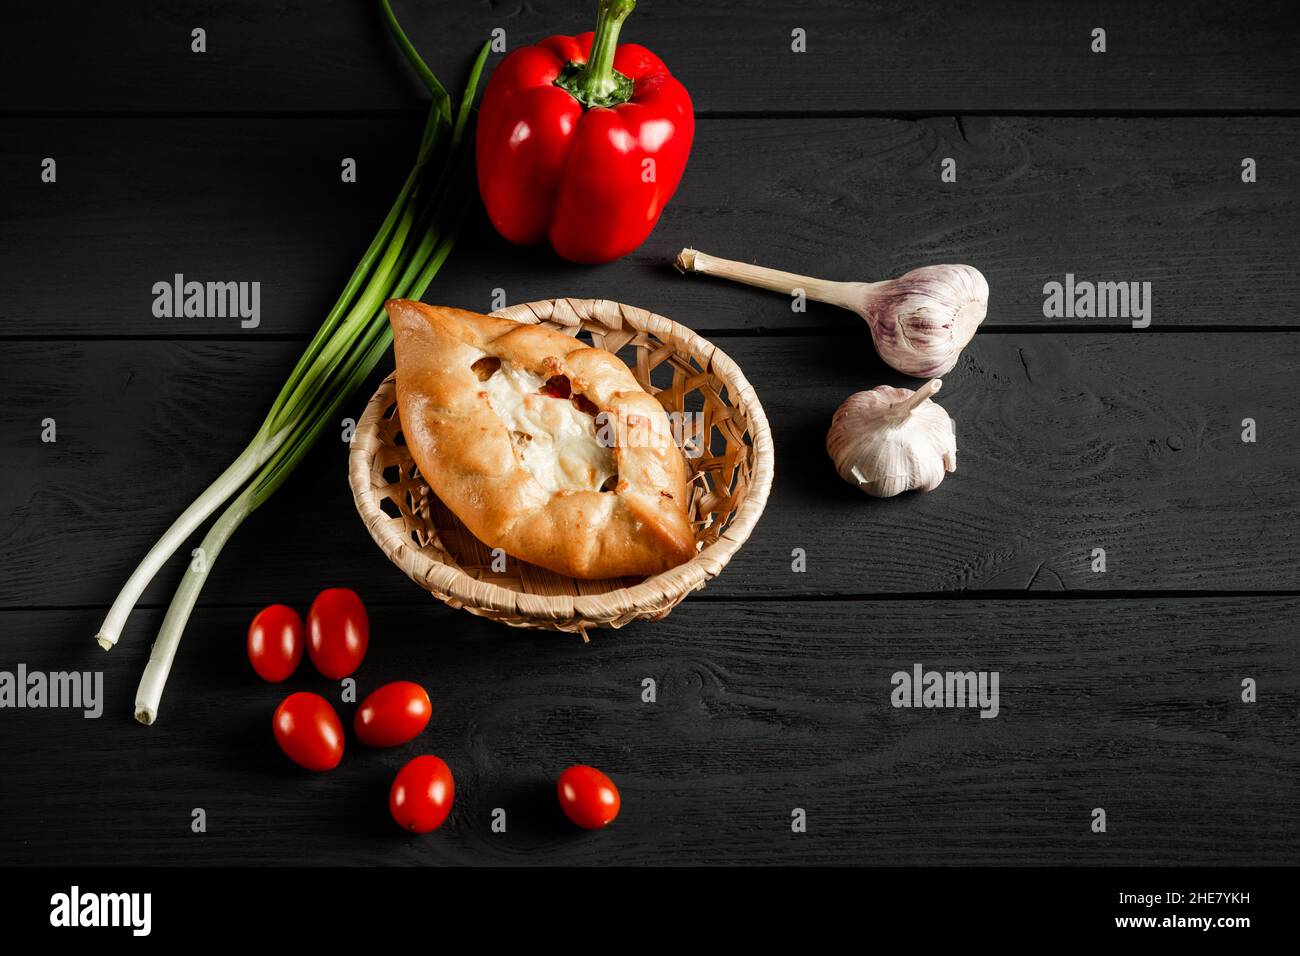 Pie in a wicker basket on a black wooden background. With a copy space.Vegetable composition - tomatoes, pepper, onion, garlic. Stock Photo